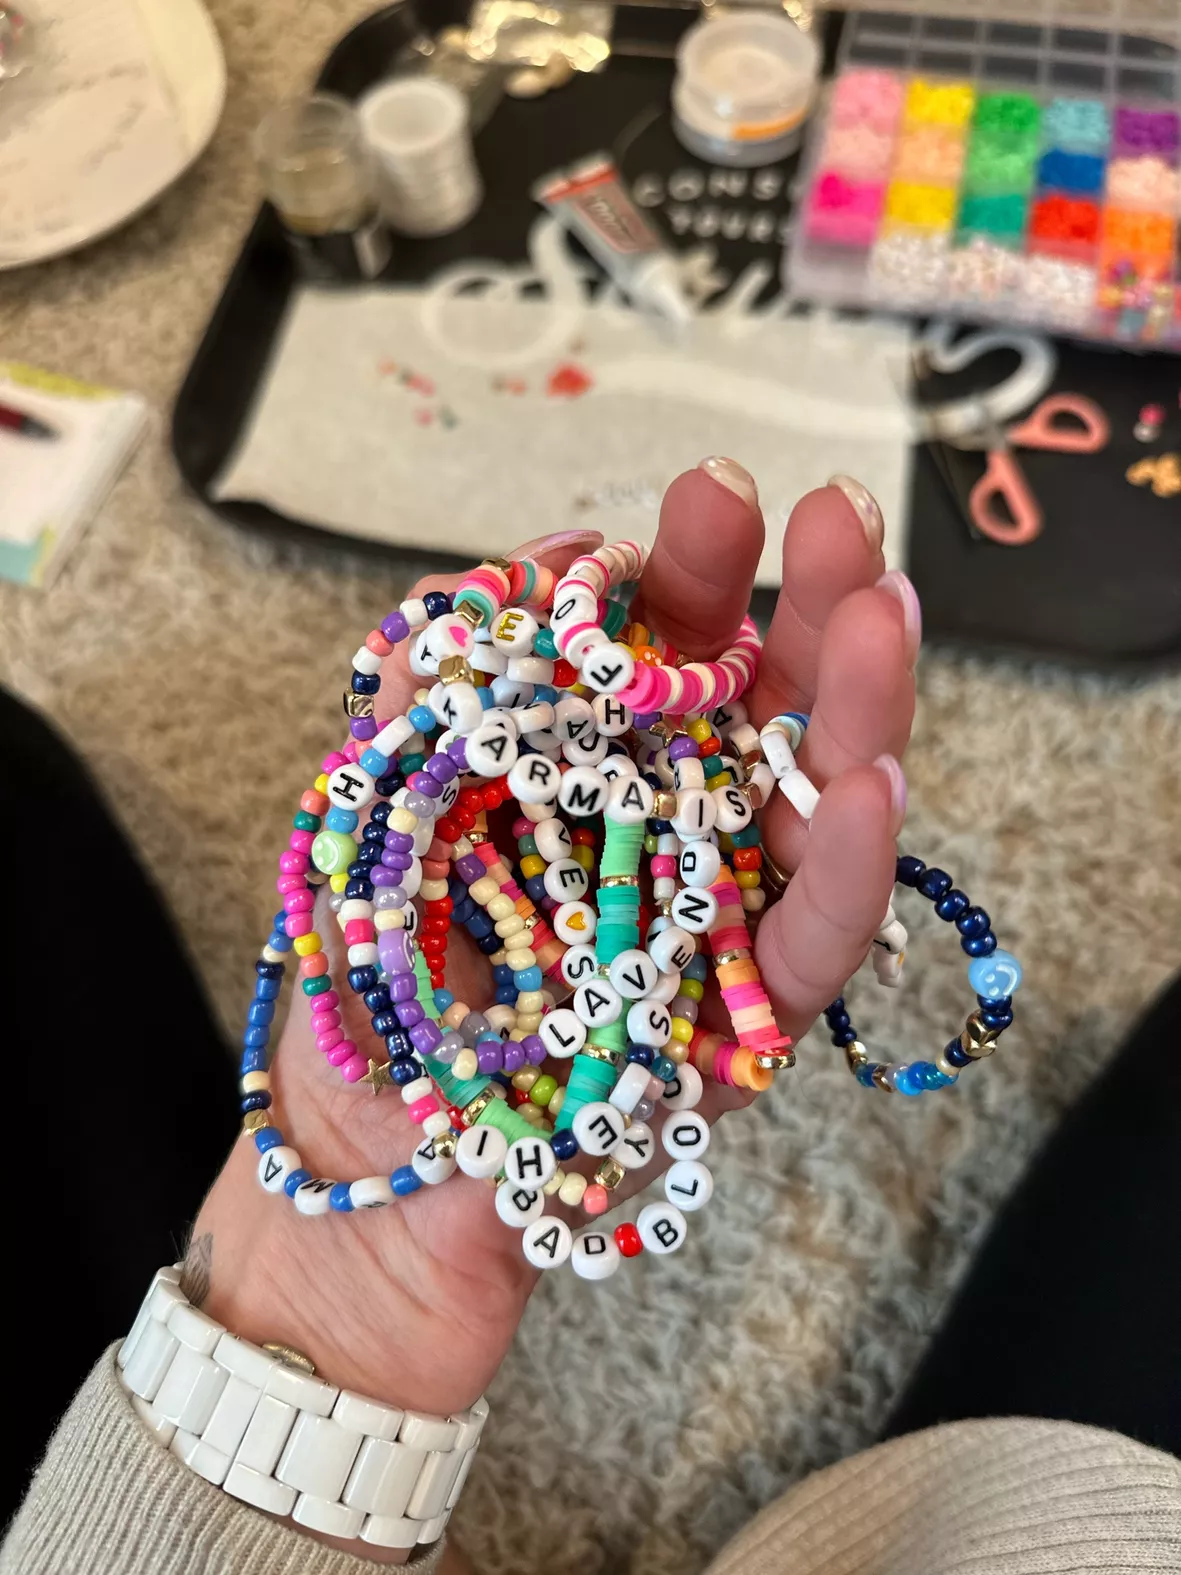 How To Make and Trade Friendship Bracelets (Taylor Swift Eras Tour Version)  